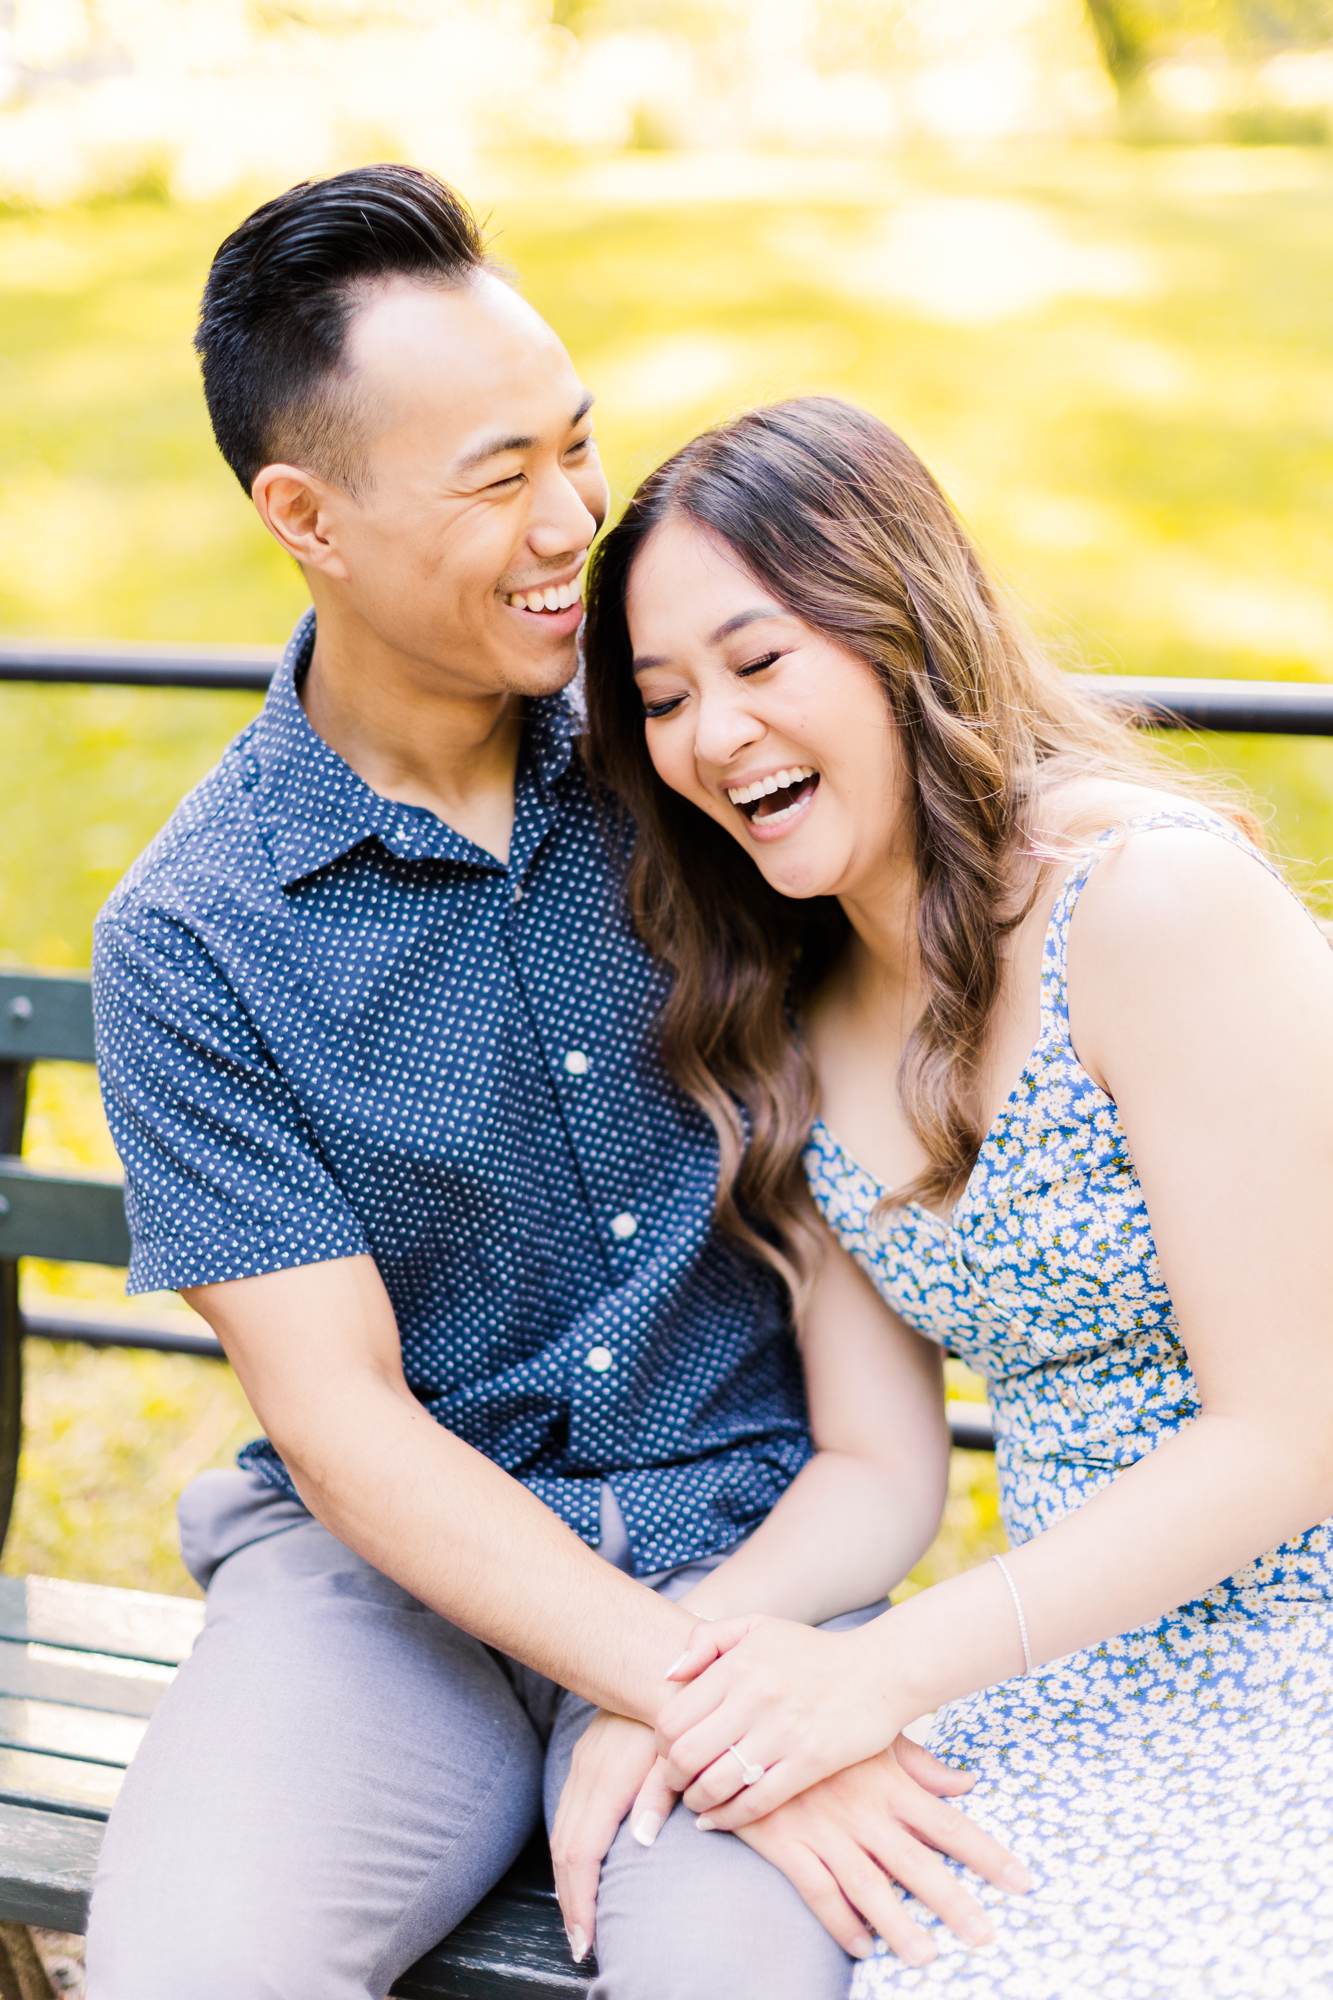 Vibrant Engagement Photos in Central Park, New York